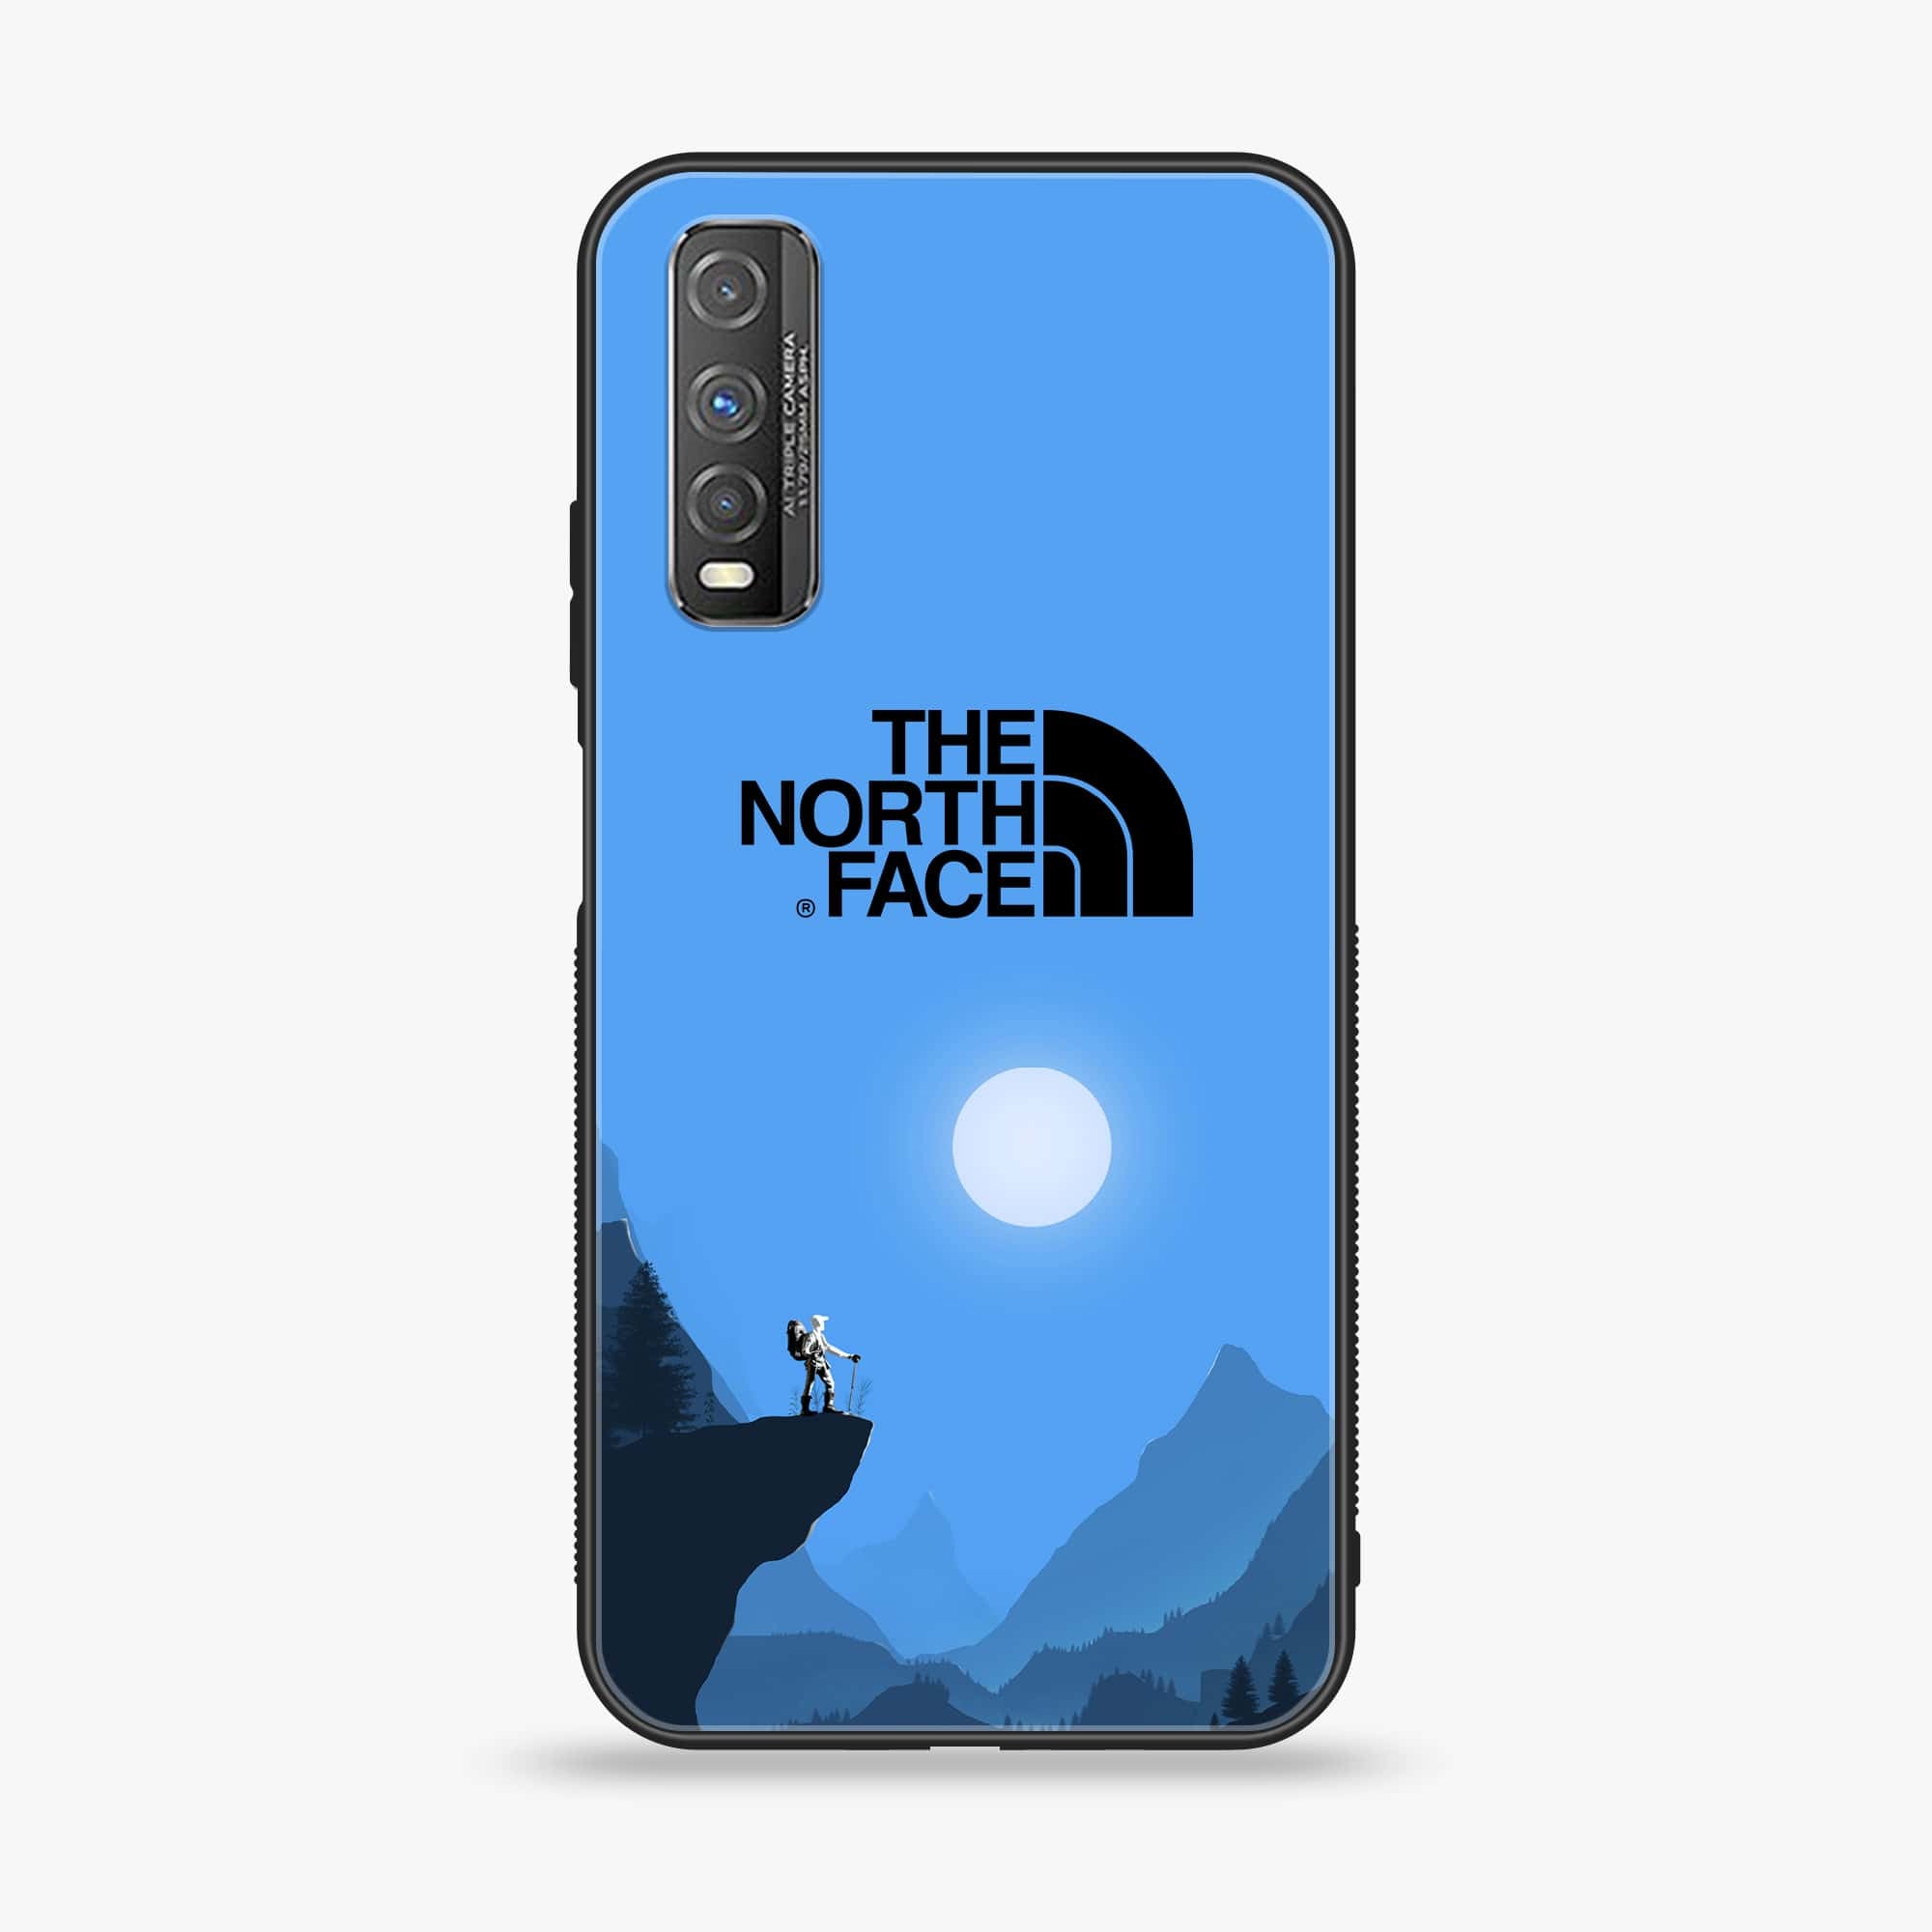 Vivo Y51s - The North Face Series - Premium Printed Glass soft Bumper shock Proof Case